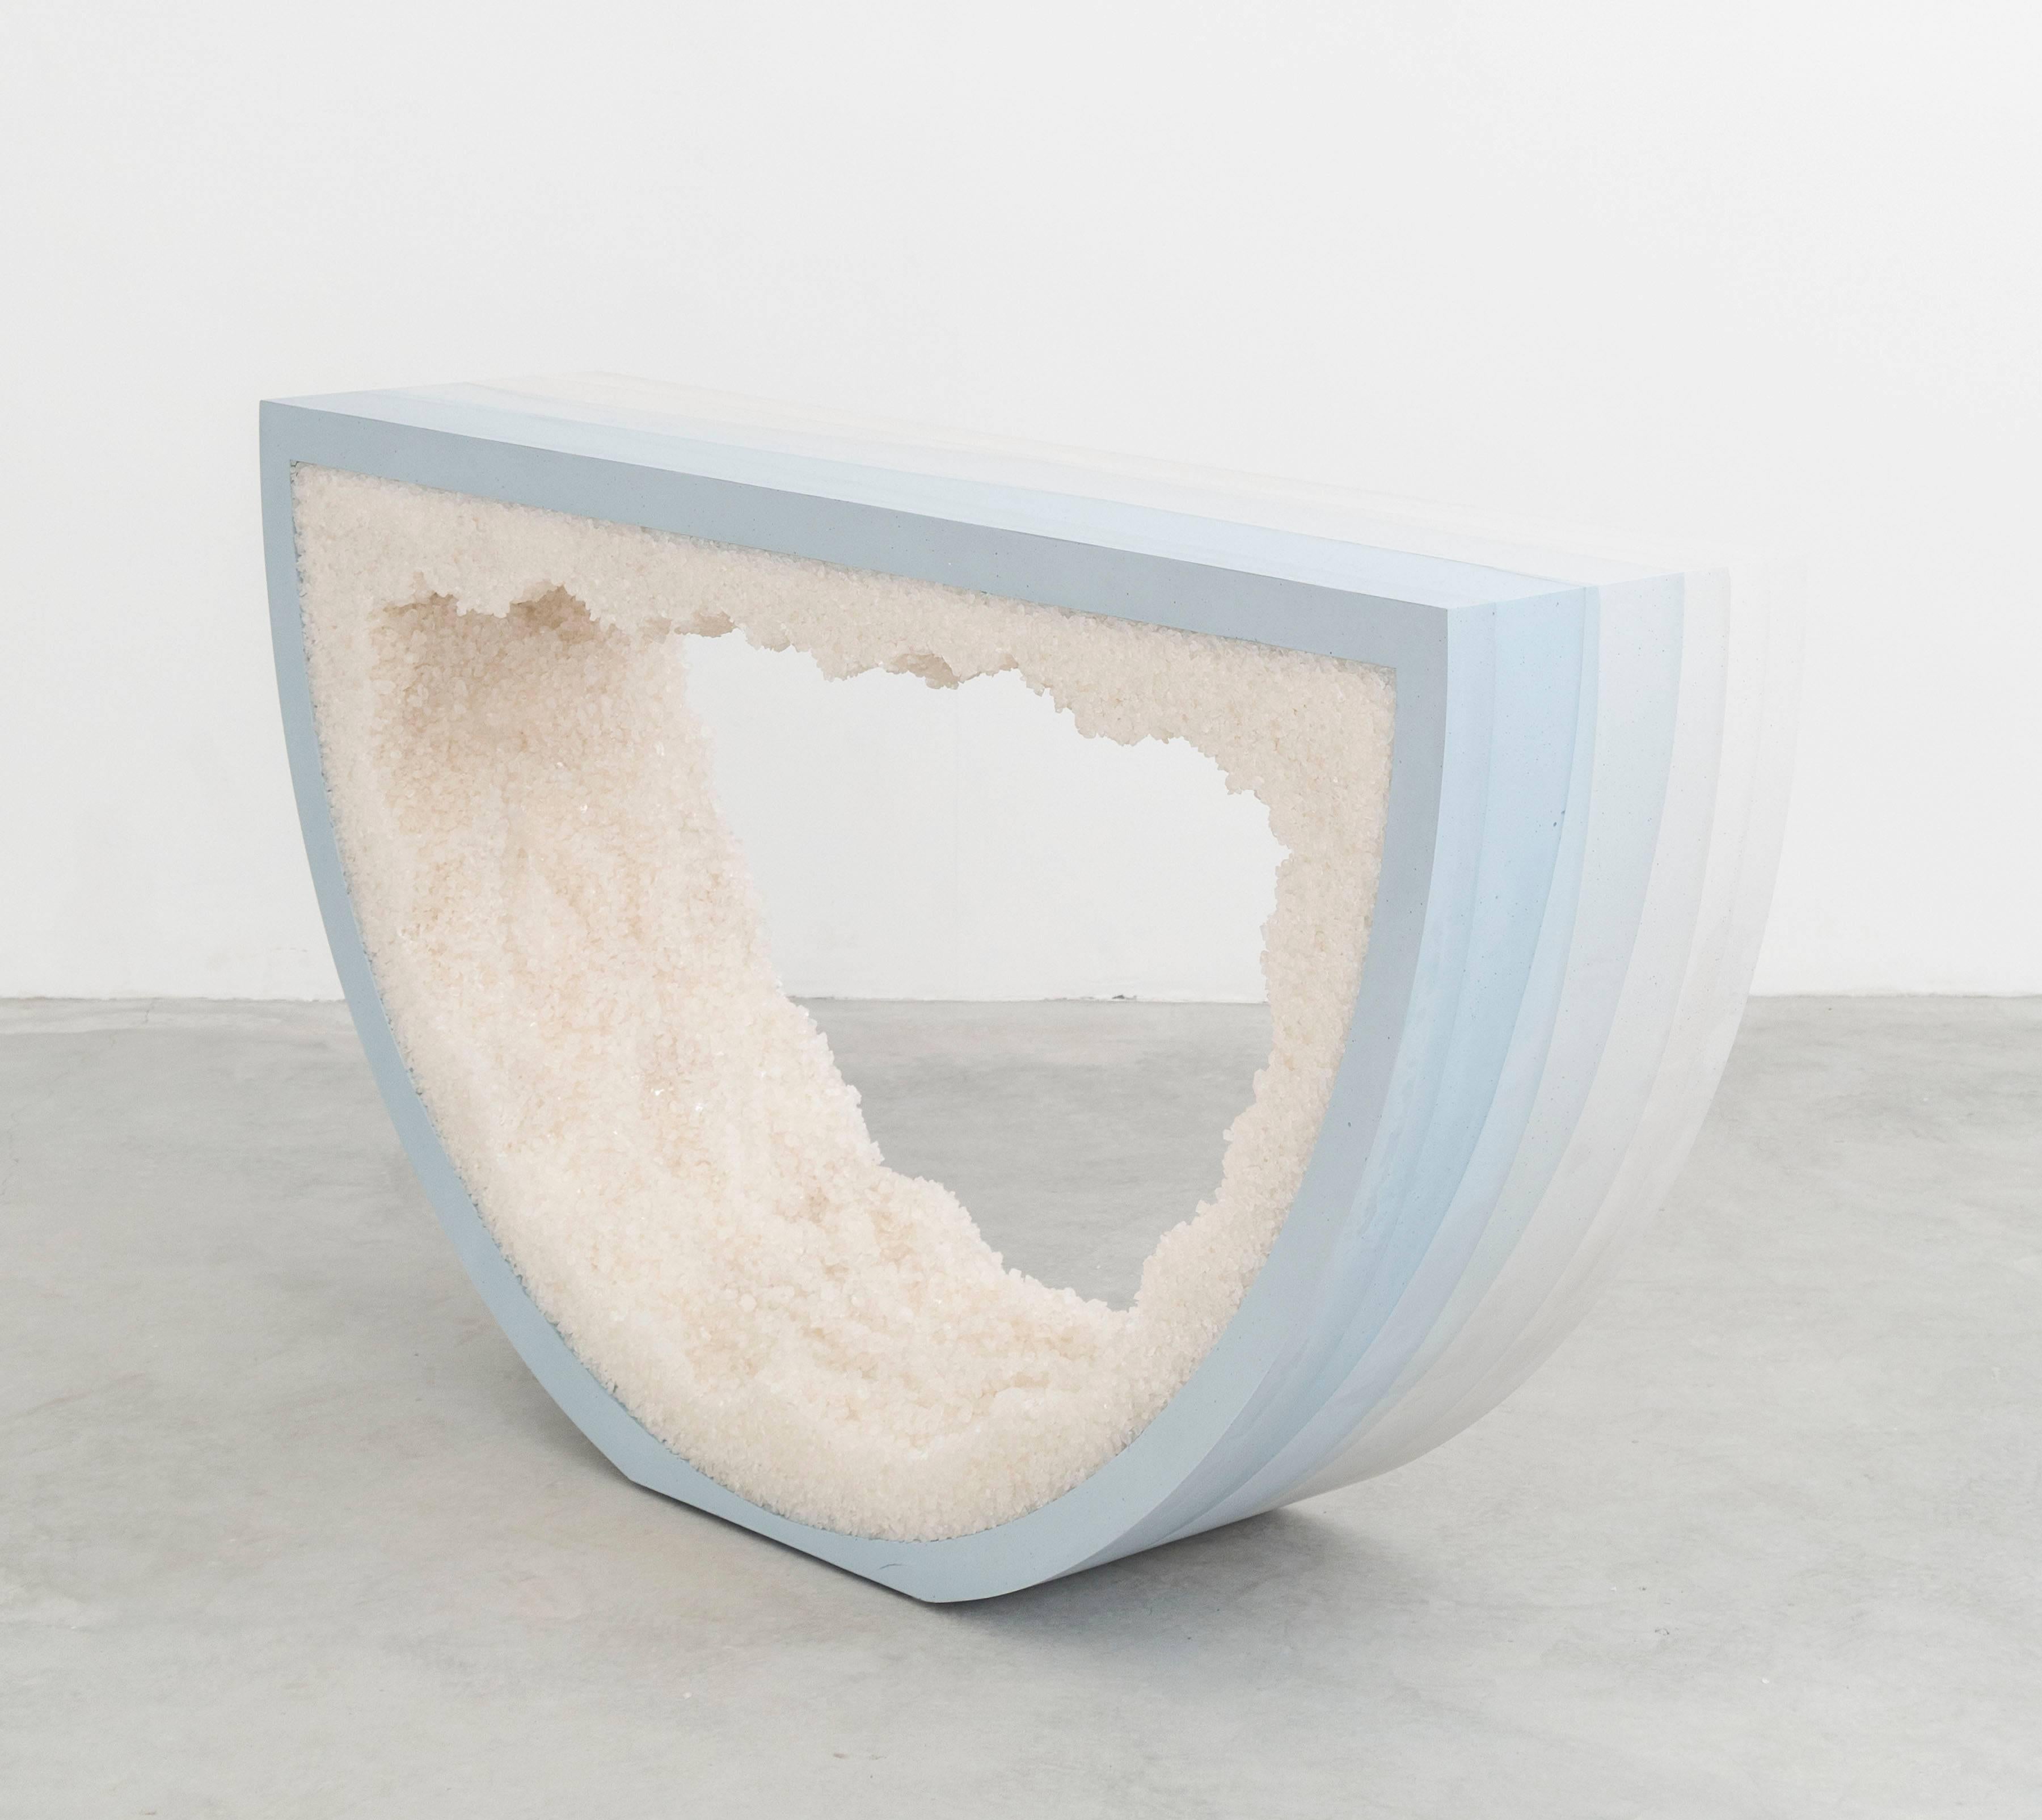 Composed from a combination of materials, the semicircle console consists of a hand-dyed white cement exterior and a rock salt interior. Packed by hand within the smooth ombre of sky blue cement, the white rock salt forms an organic texture to